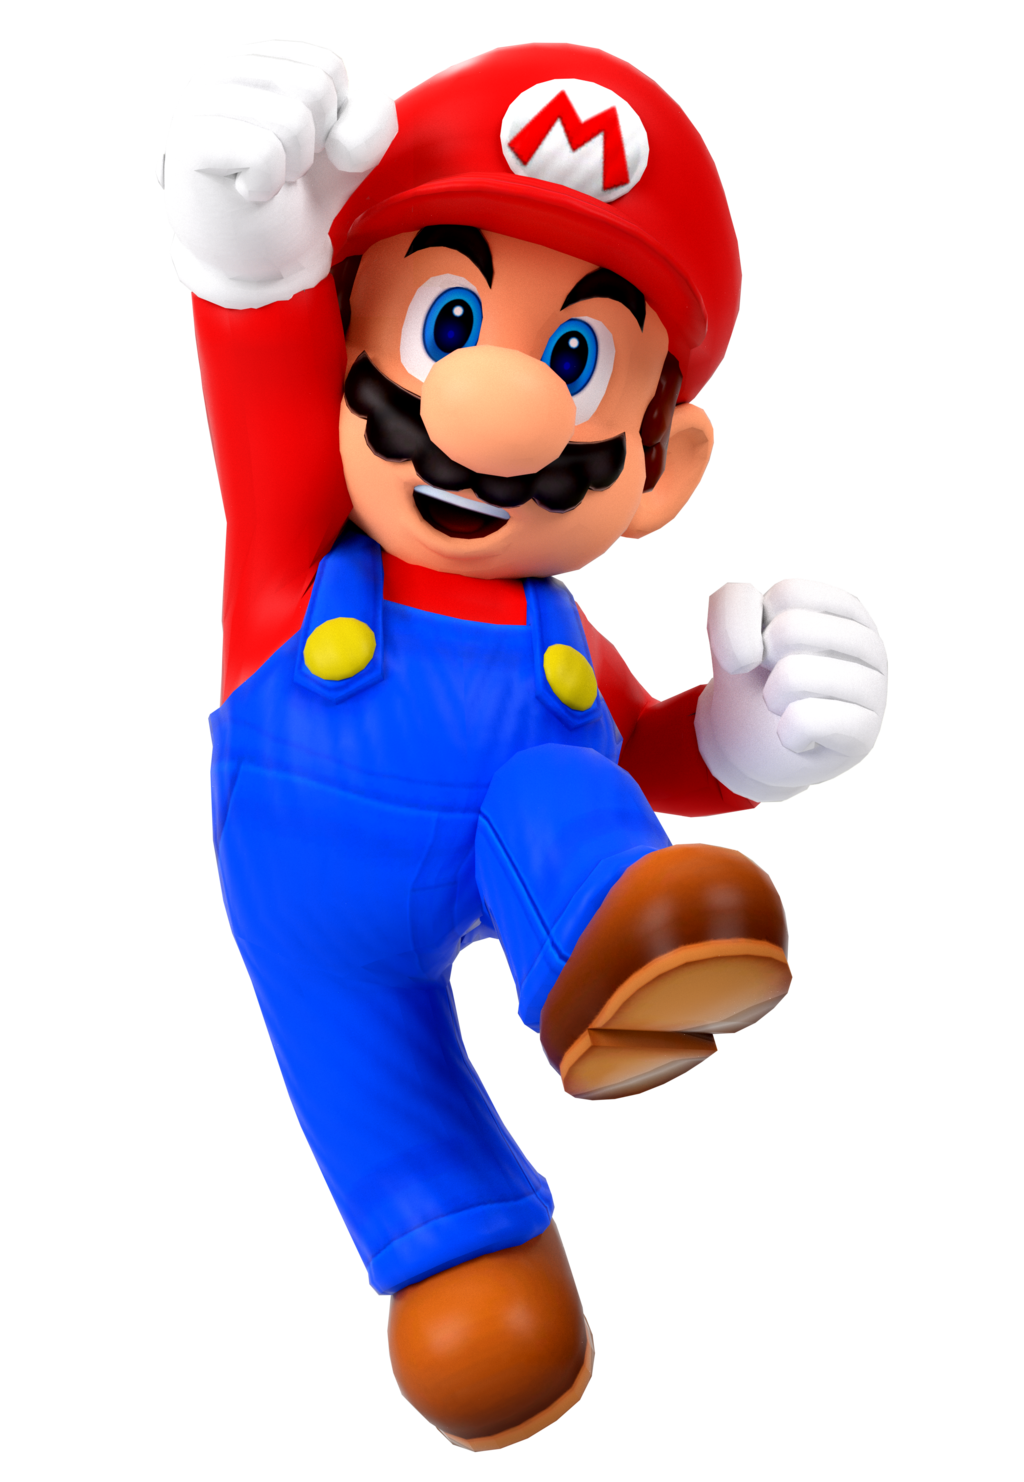 Download Toy Material Mario 64 World Super Odyssey HQ PNG Image